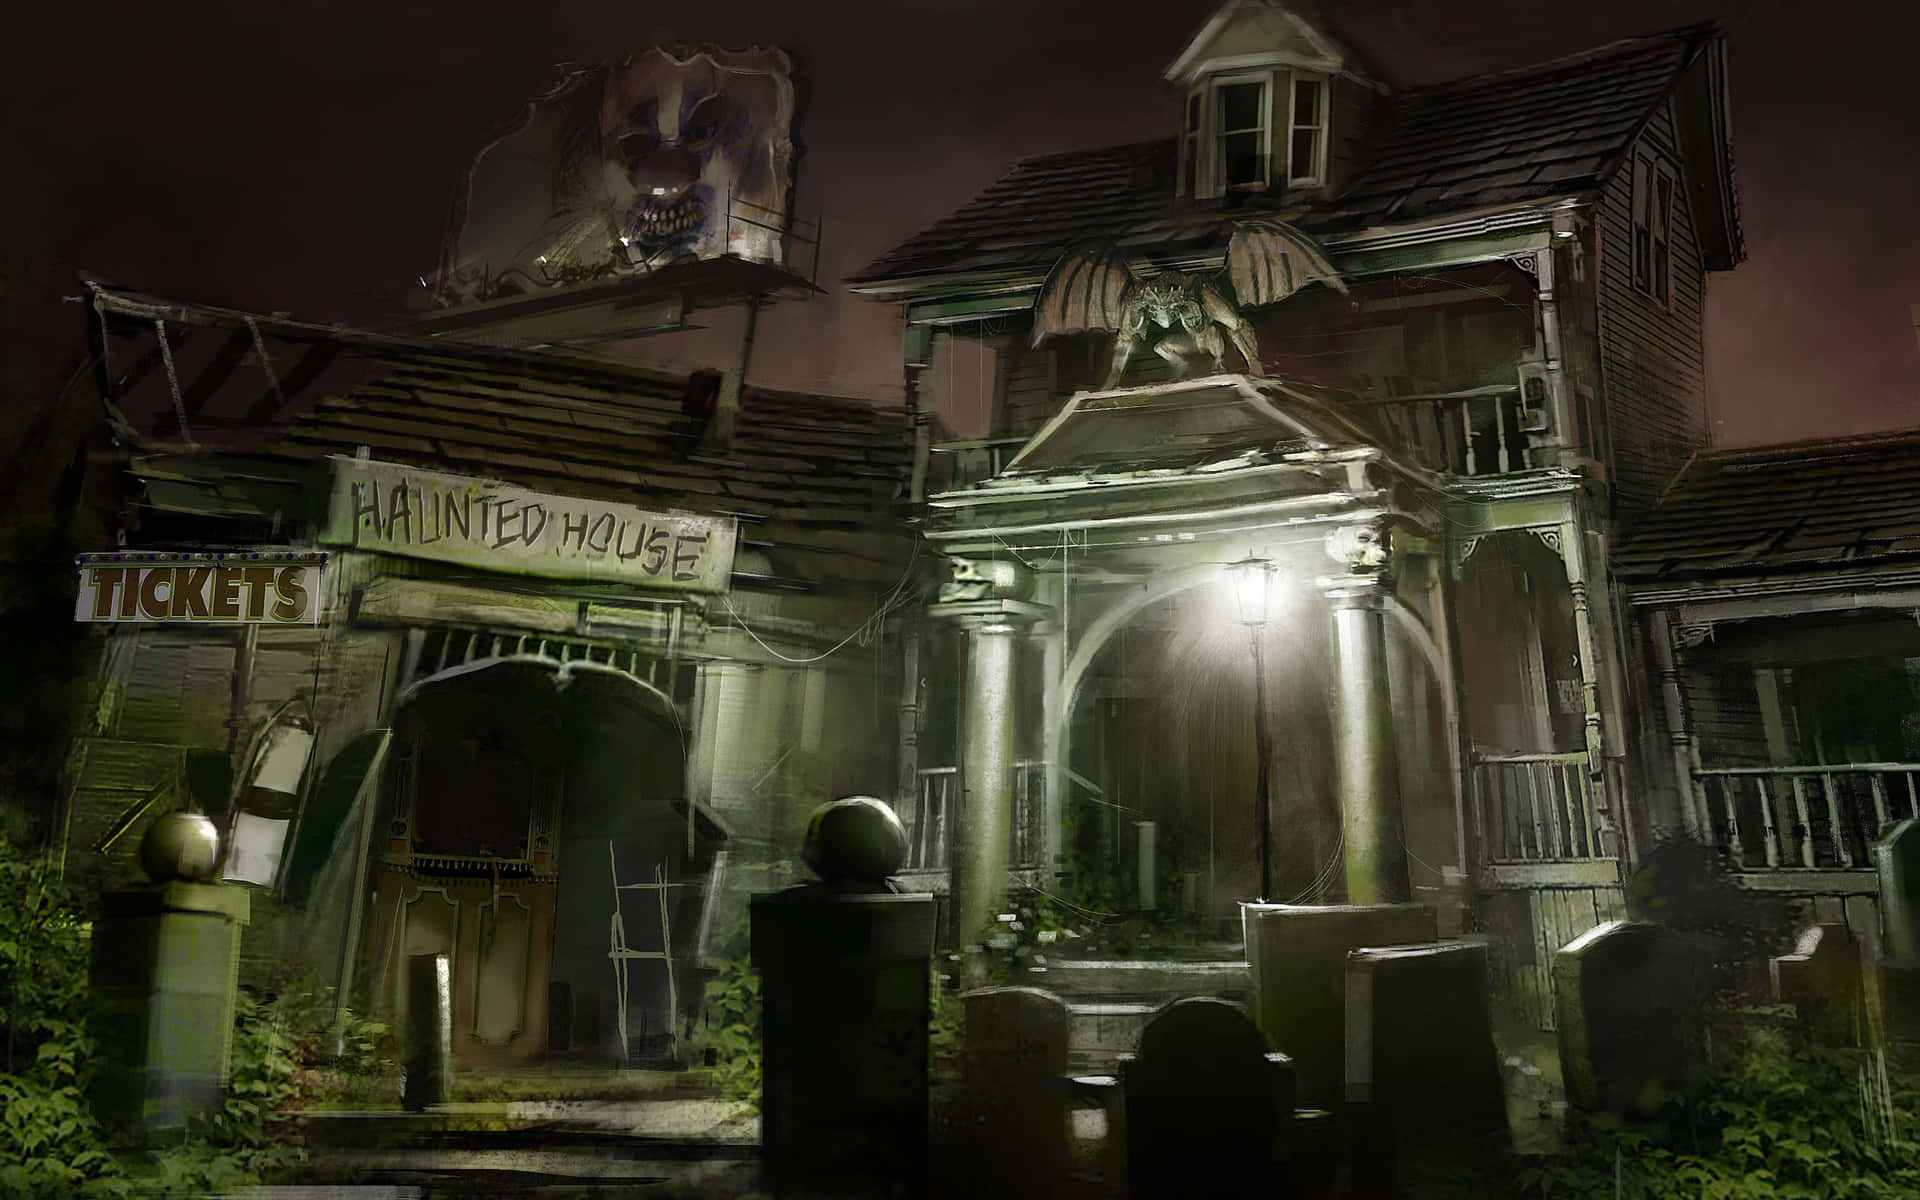 Step inside the gates of this mysterious haunted house